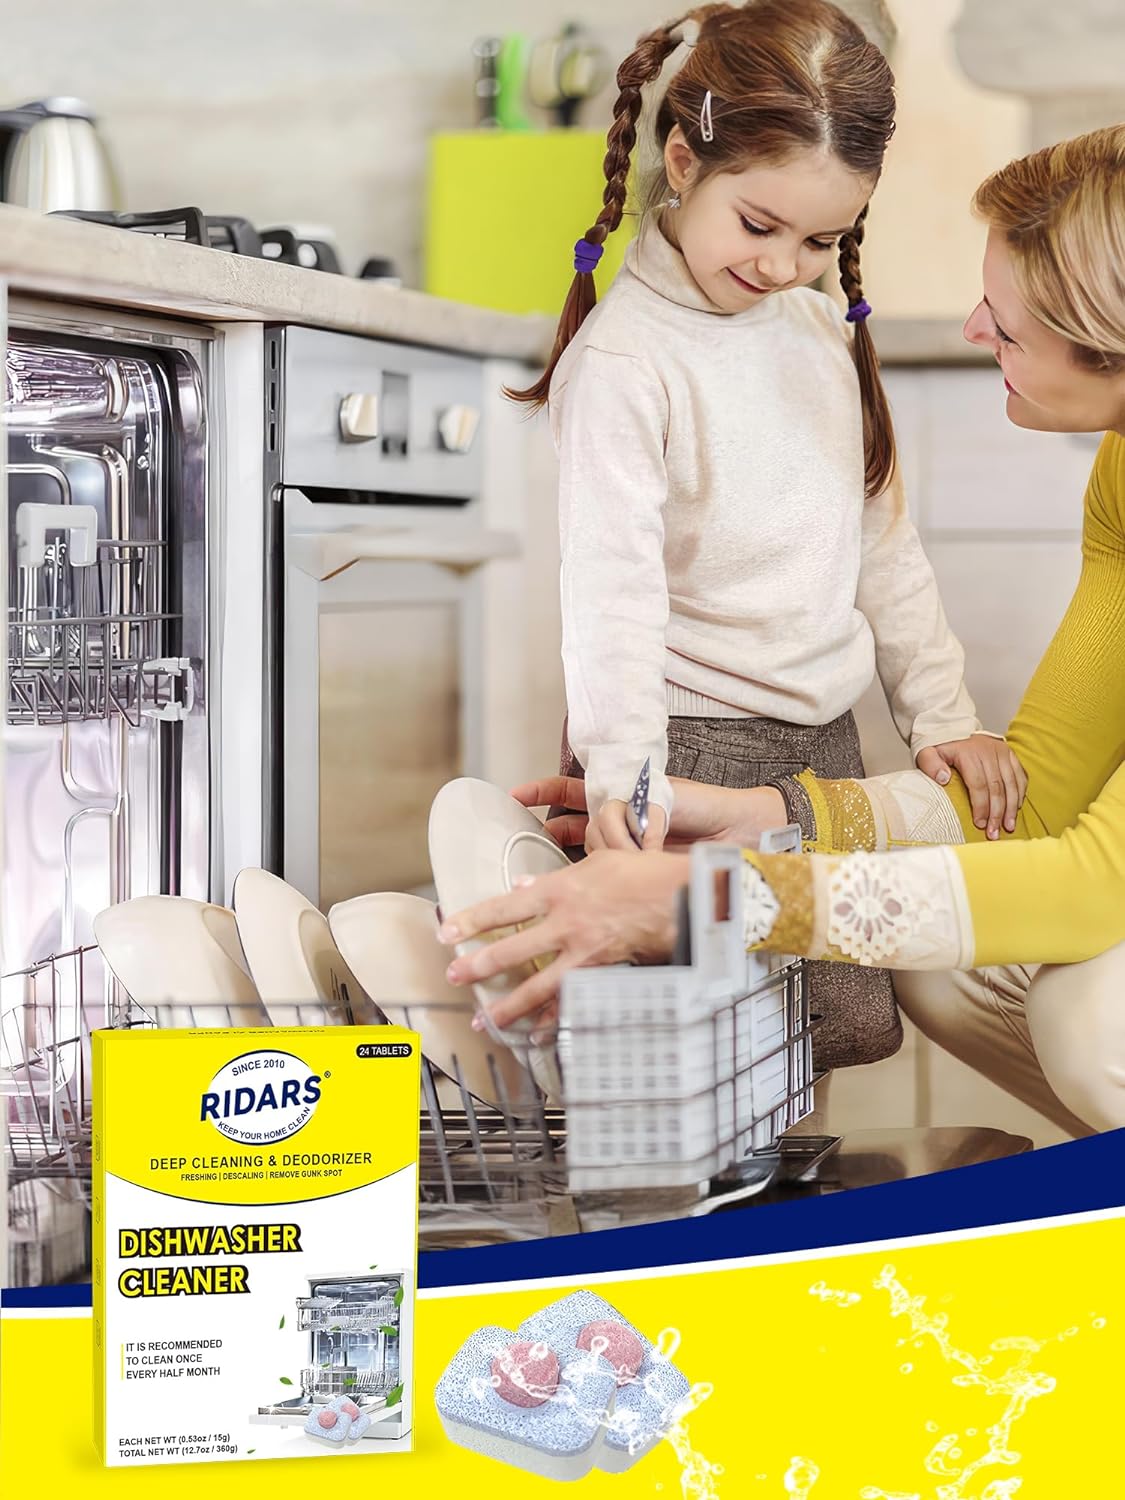 Ridars Dishwasher Cleaner - Dishwasher Cleaner and Deodorizer, Remove Limescale and Odor, 24 Tablets : Health & Household